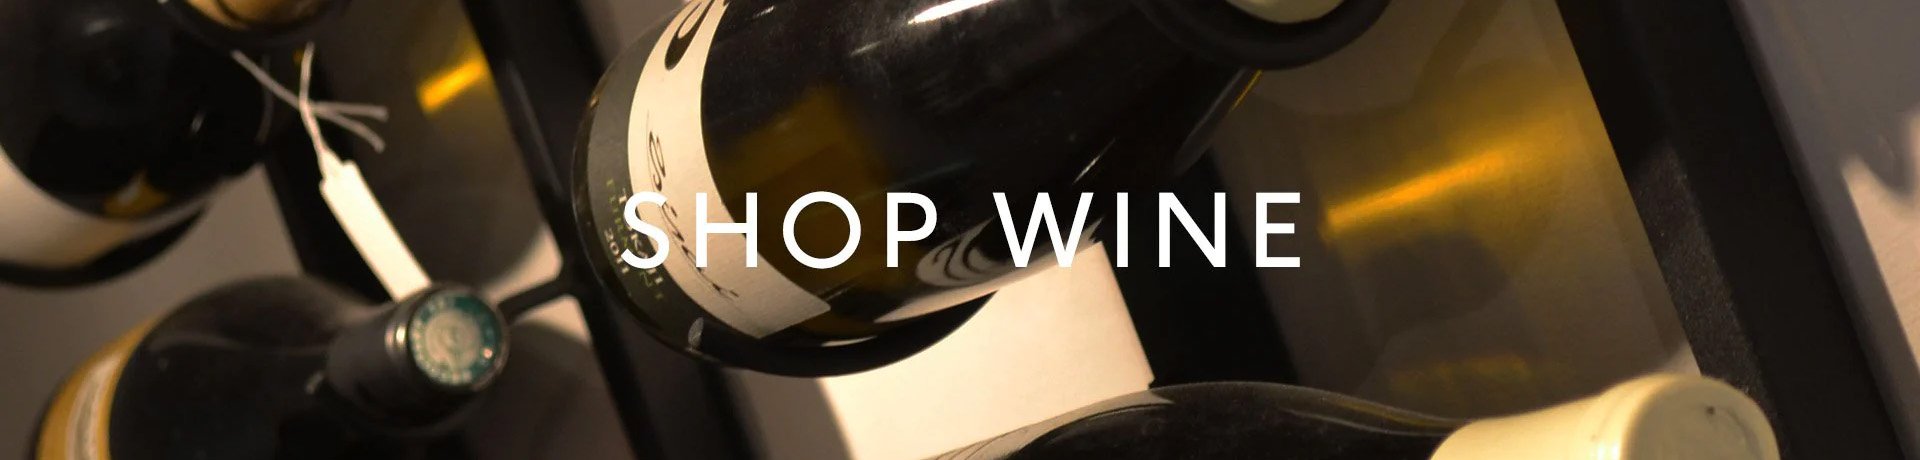 Shop For Wines at Somerset Wines Co